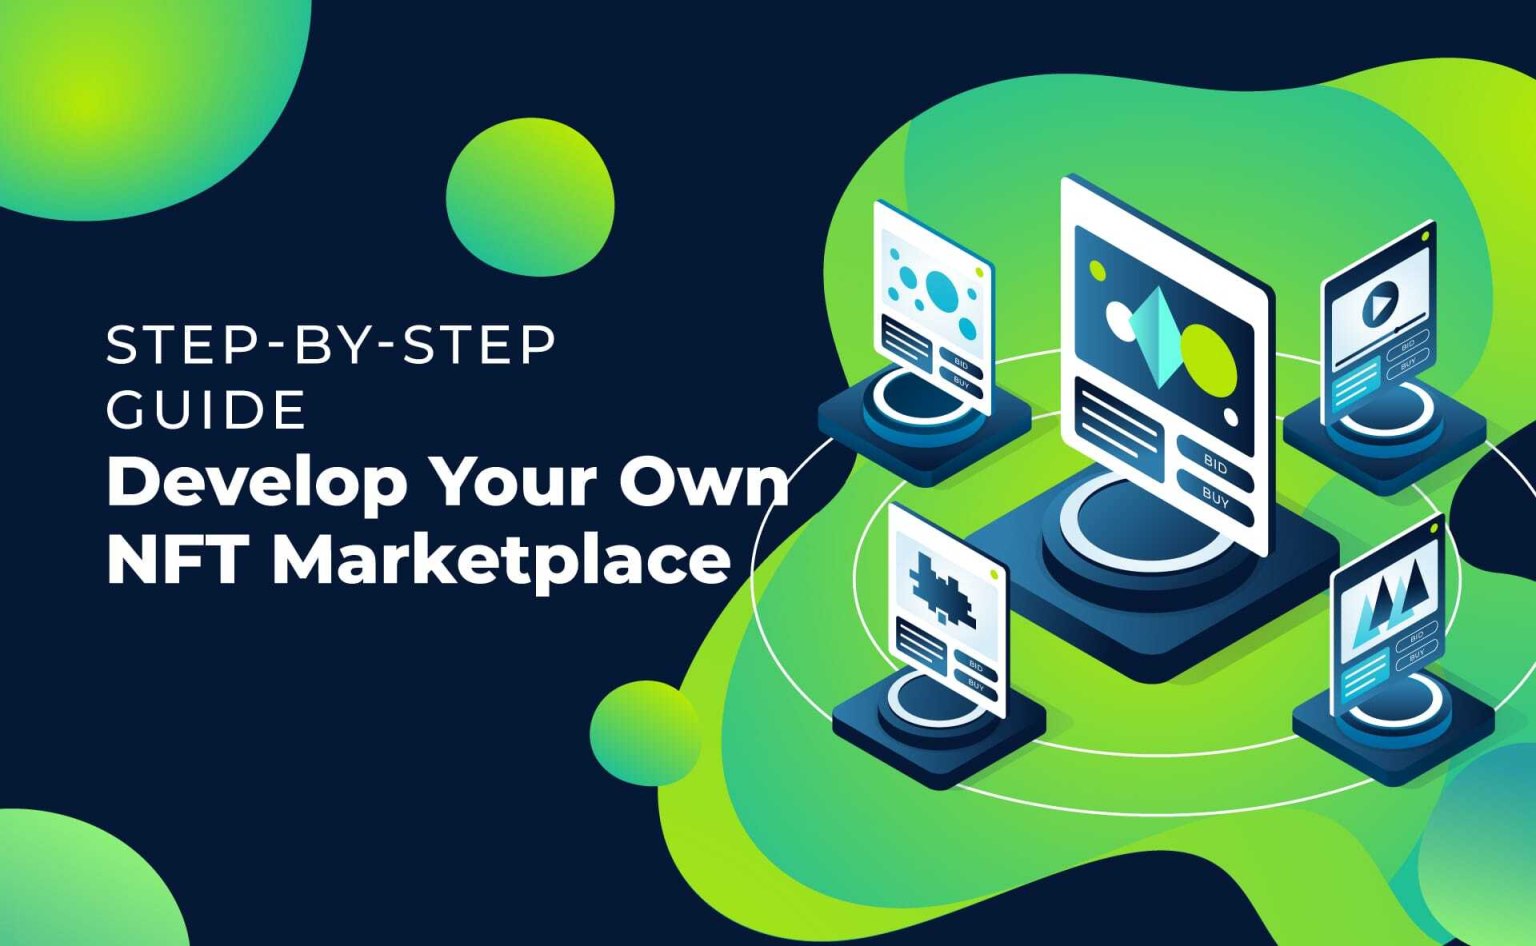 How To Create Your Own NFT Marketplace - Develop Your Own NFT Marketplace - Step-by-Step Guide - Moralis